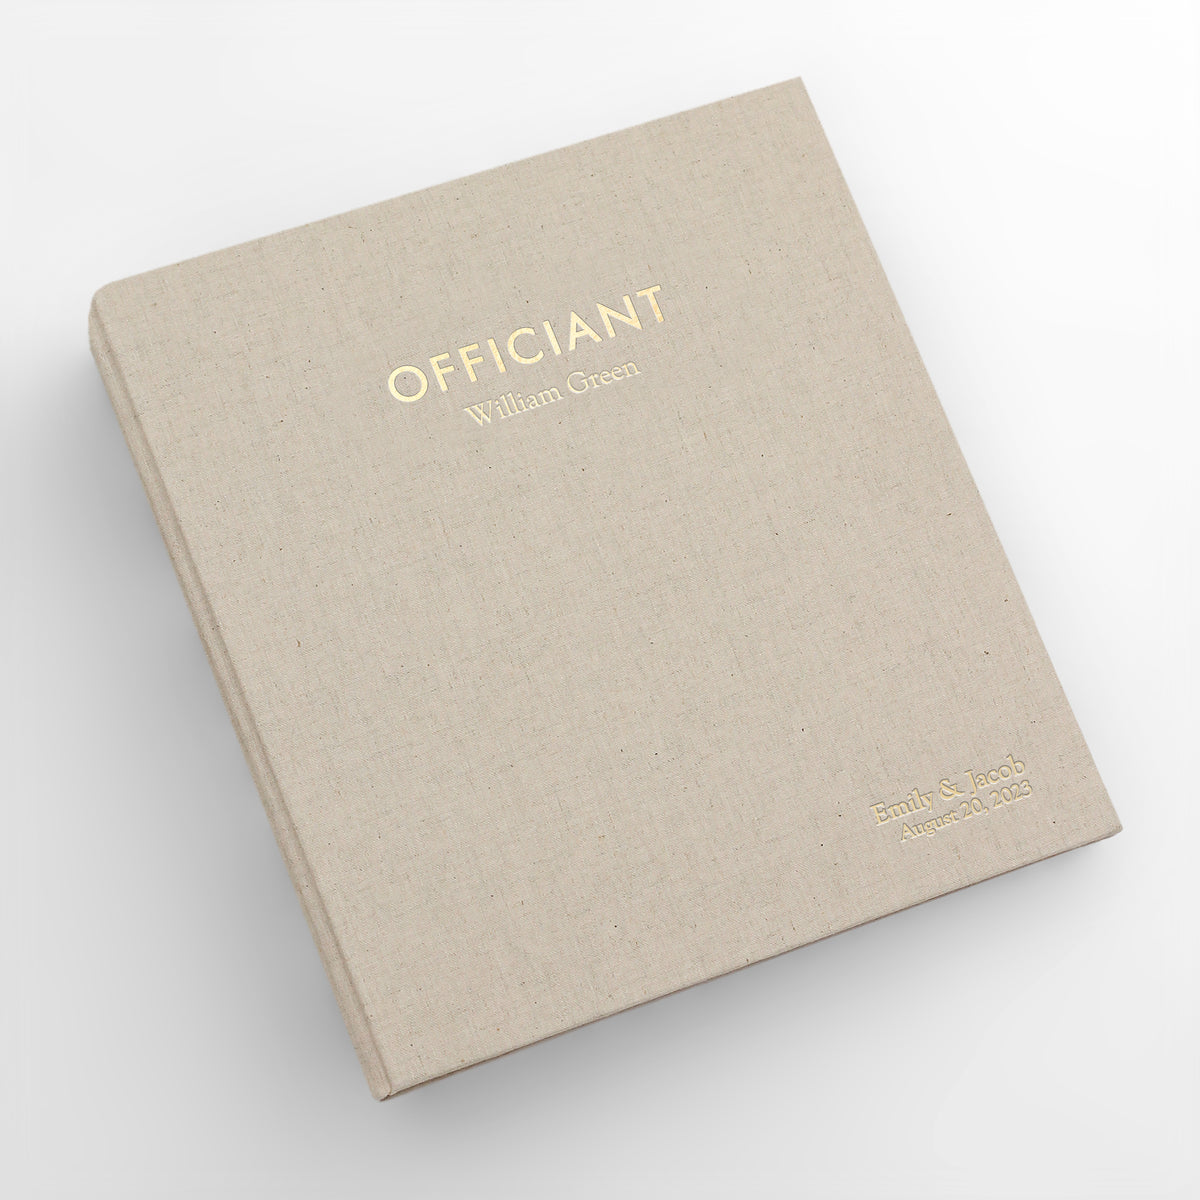 Officiant Binder with Natural Linen Cover